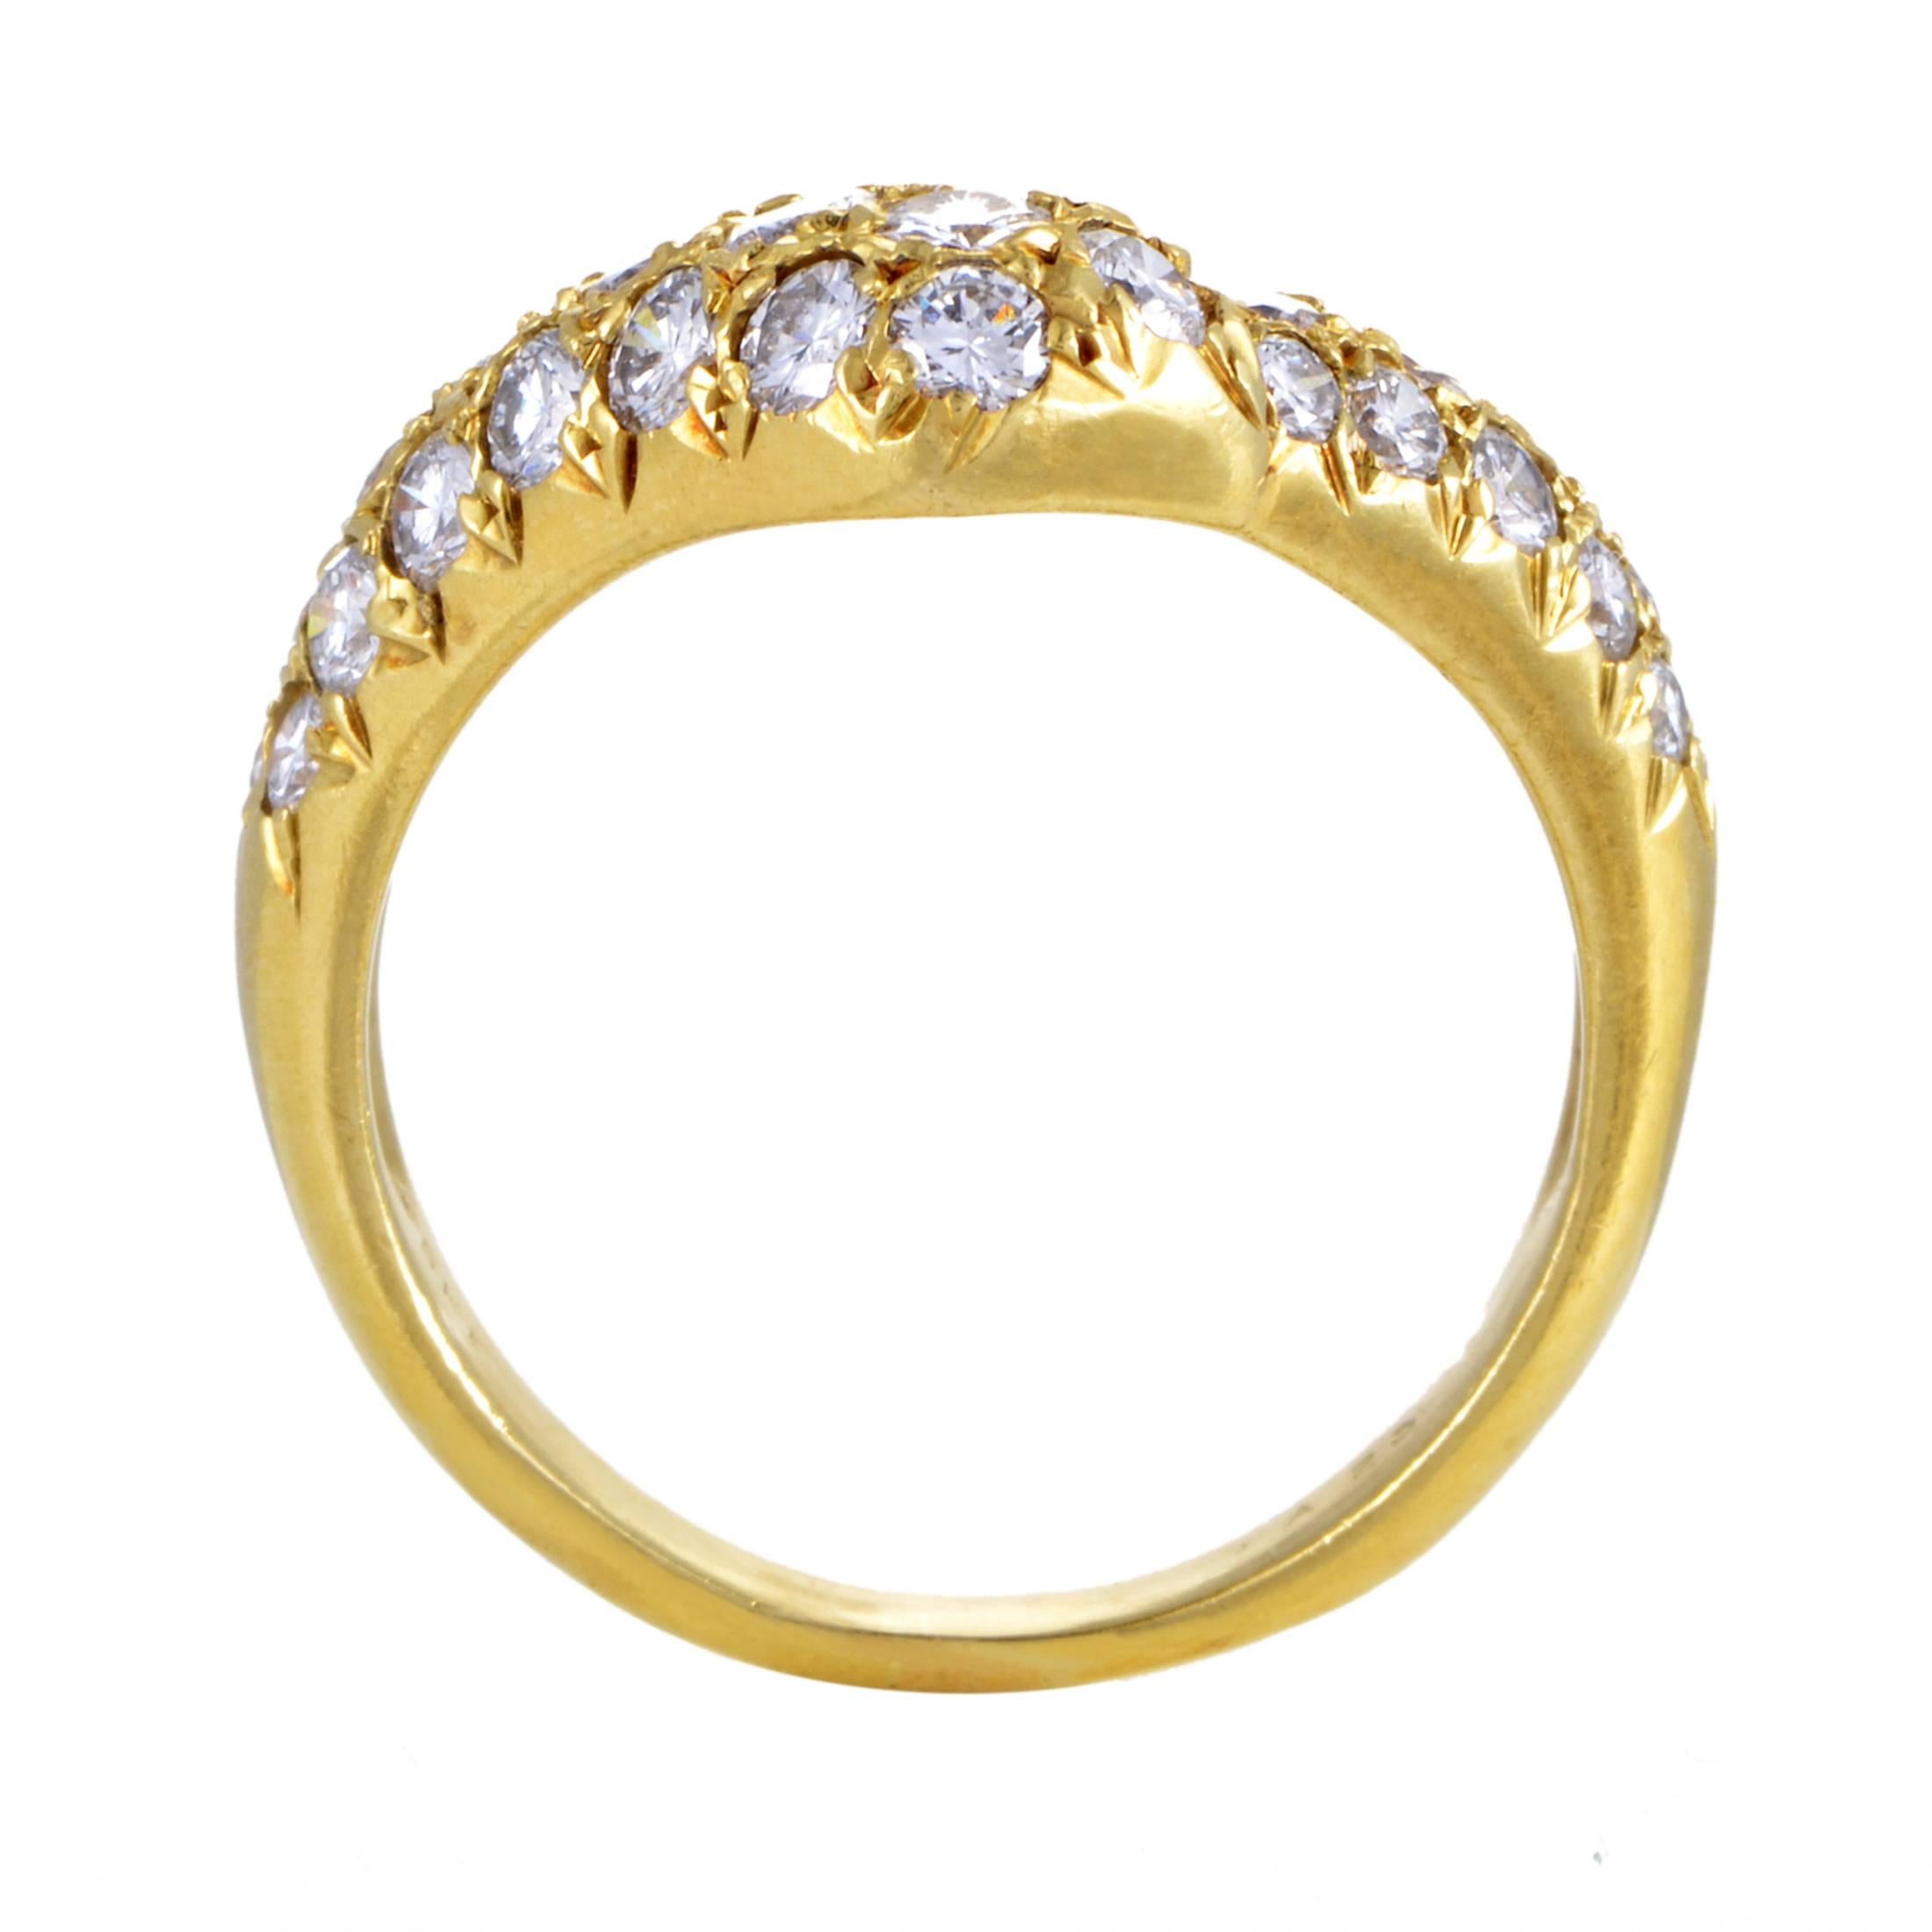 Boasting a wonderfully crooked shape made of enchantingly radiant 18K yellow gold and embellished with a neat arrangement of scintillating F-color diamonds of VVS clarity that weigh in total approximately 1.20 carats, this is a classically appealing